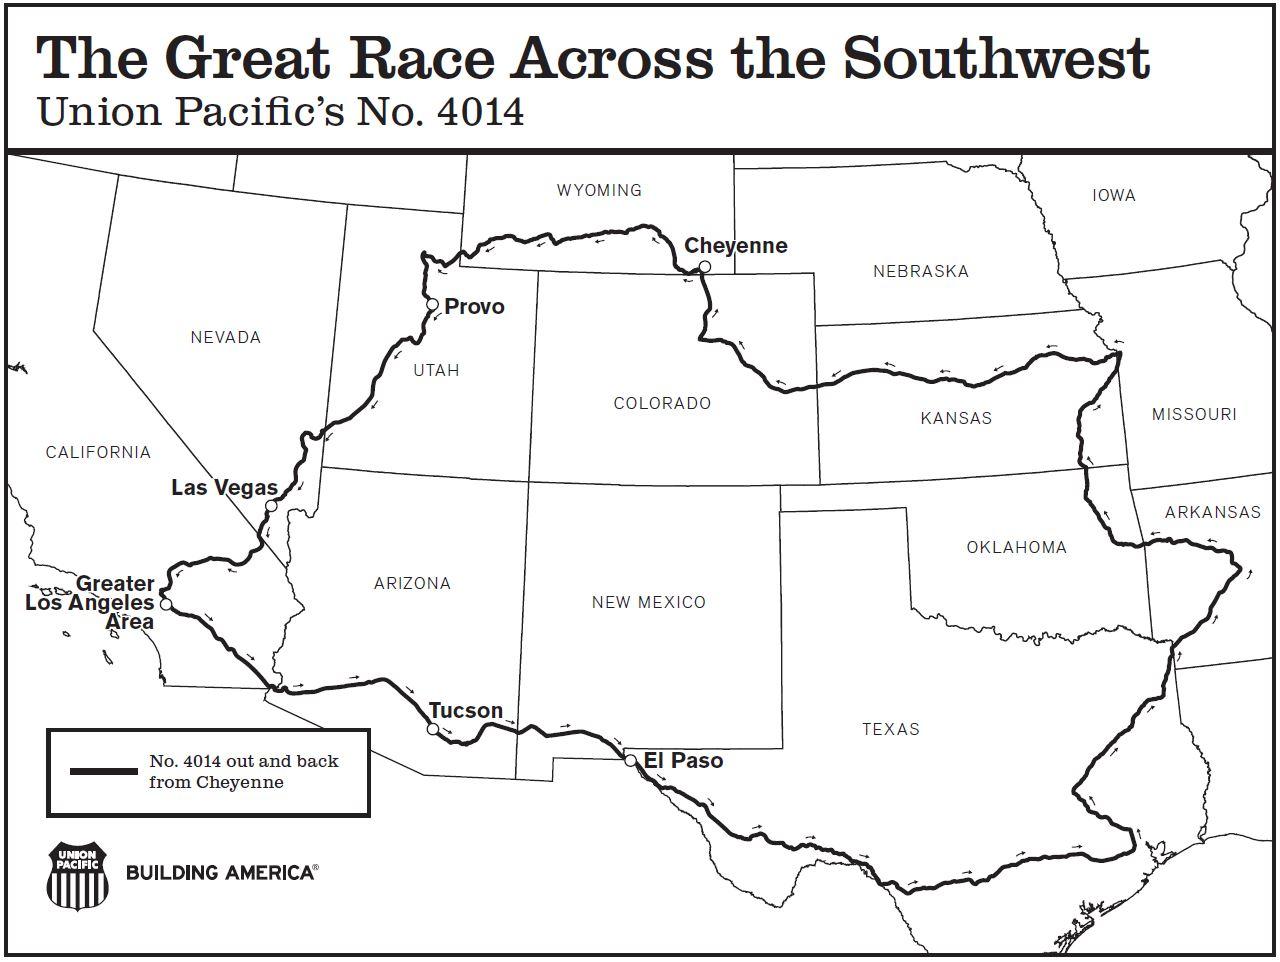 UP Great Race Across the Southwest